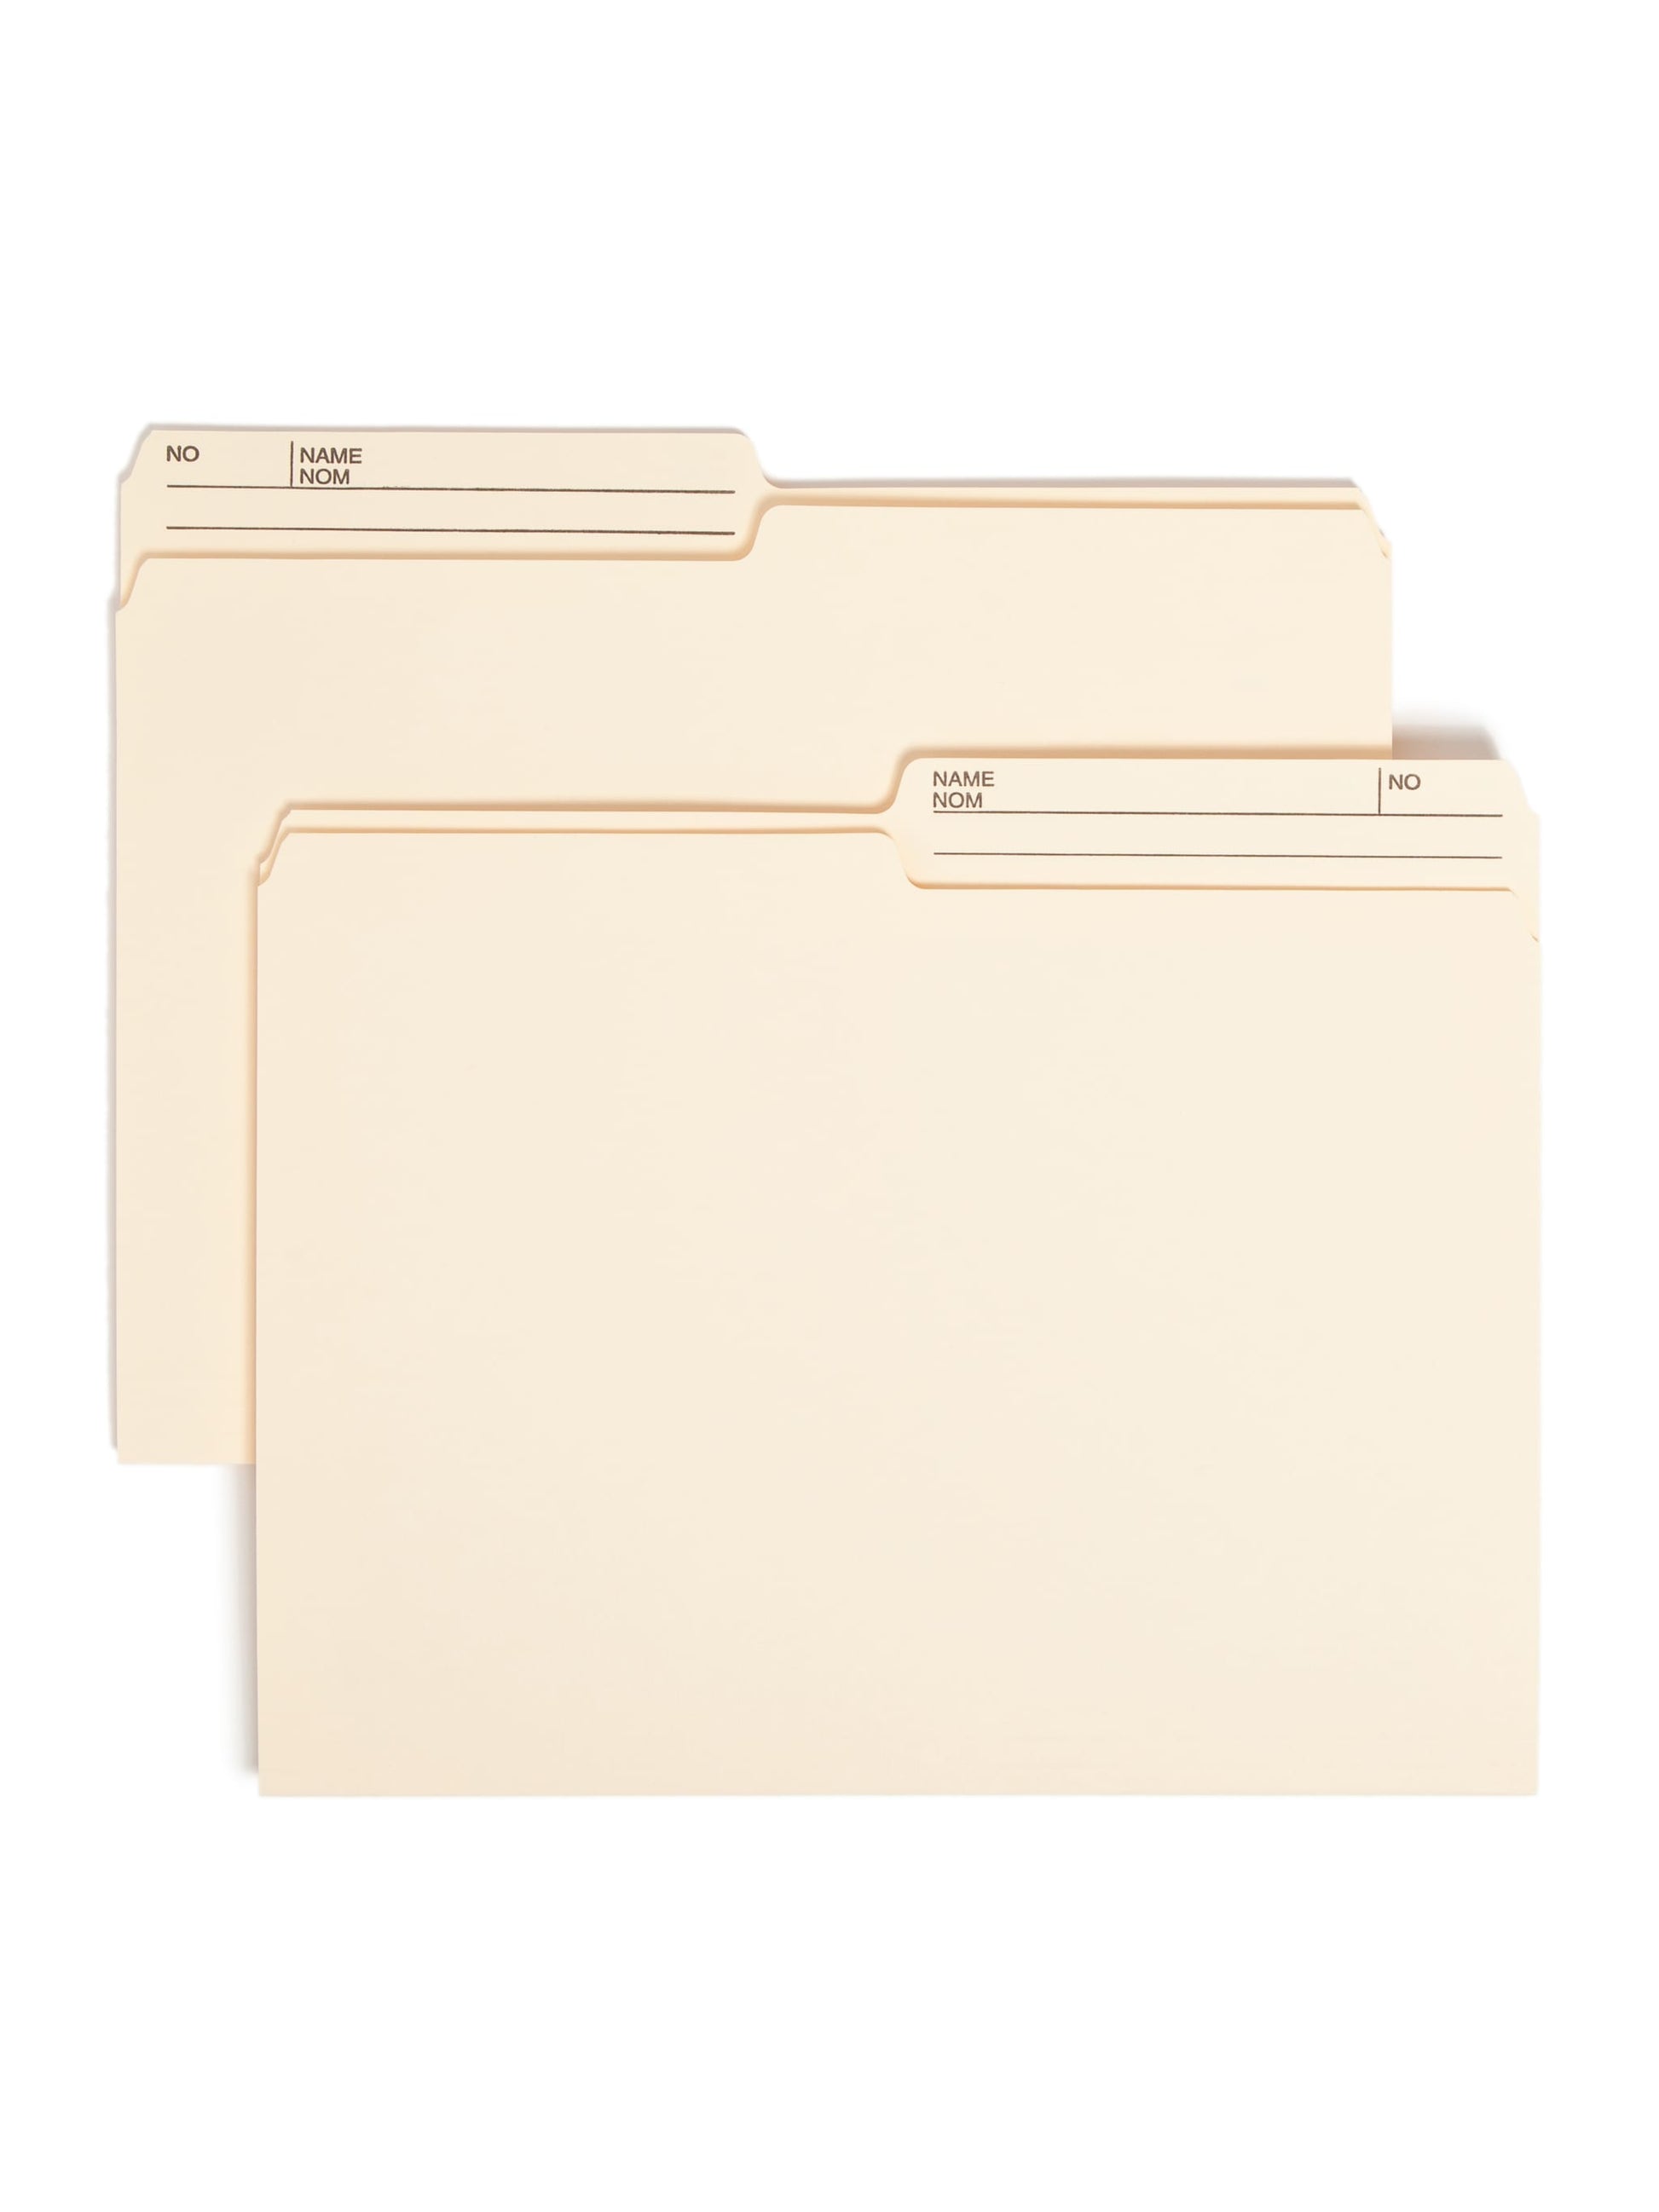 WaterShed®/CutLess® Reversible Printed Tab File Folders, Manila Color, Letter Size, 086486103909